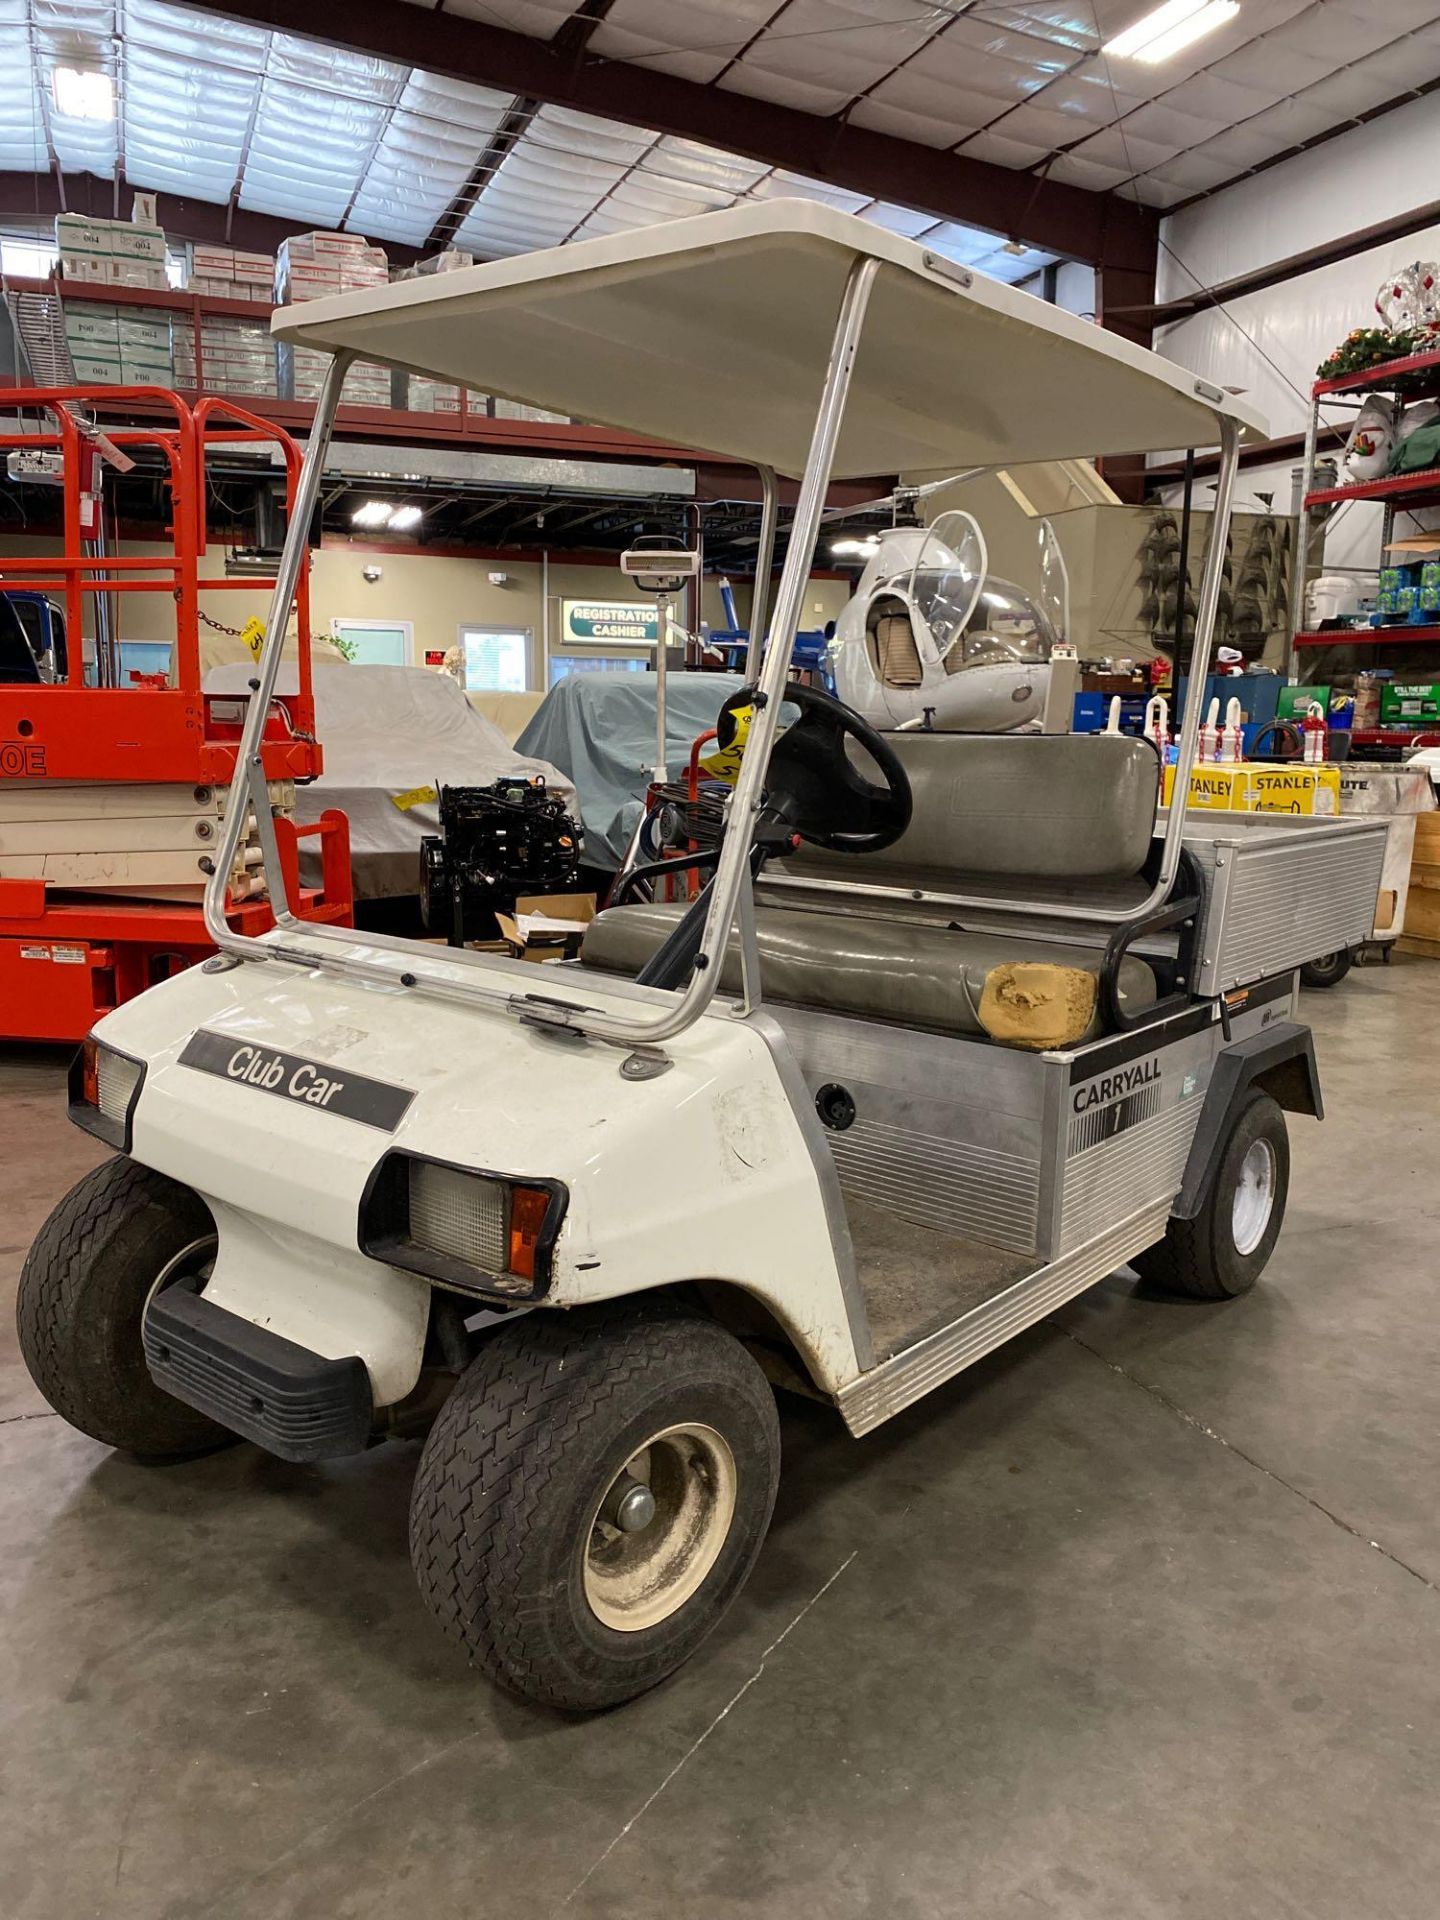 CLUB CAR CARRYALL ELECTRIC UTILITY CART WITH BED, RUNS AND OPERATES